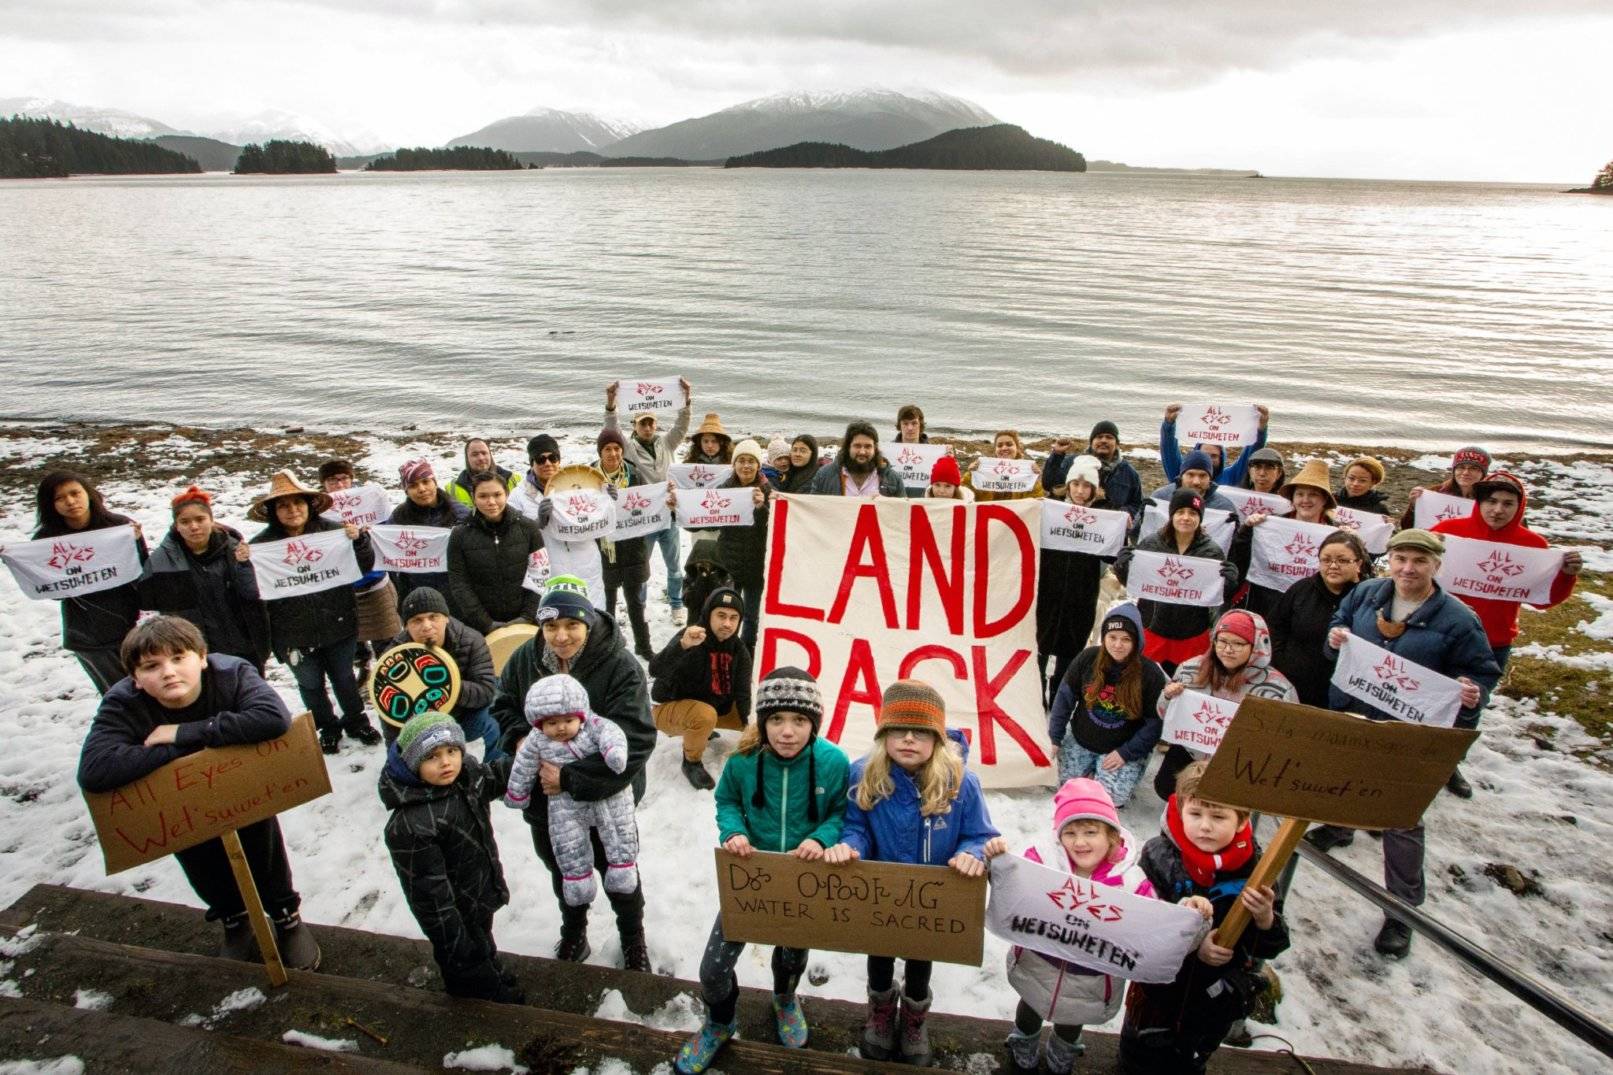 An event held in solidarity with Wet’suwet’en pipeline protests being held in British Columbia drew dozens of Juneauites to Auke Bay Recreation Area Sunday. (Courtesy Photo | Sigoop Price)